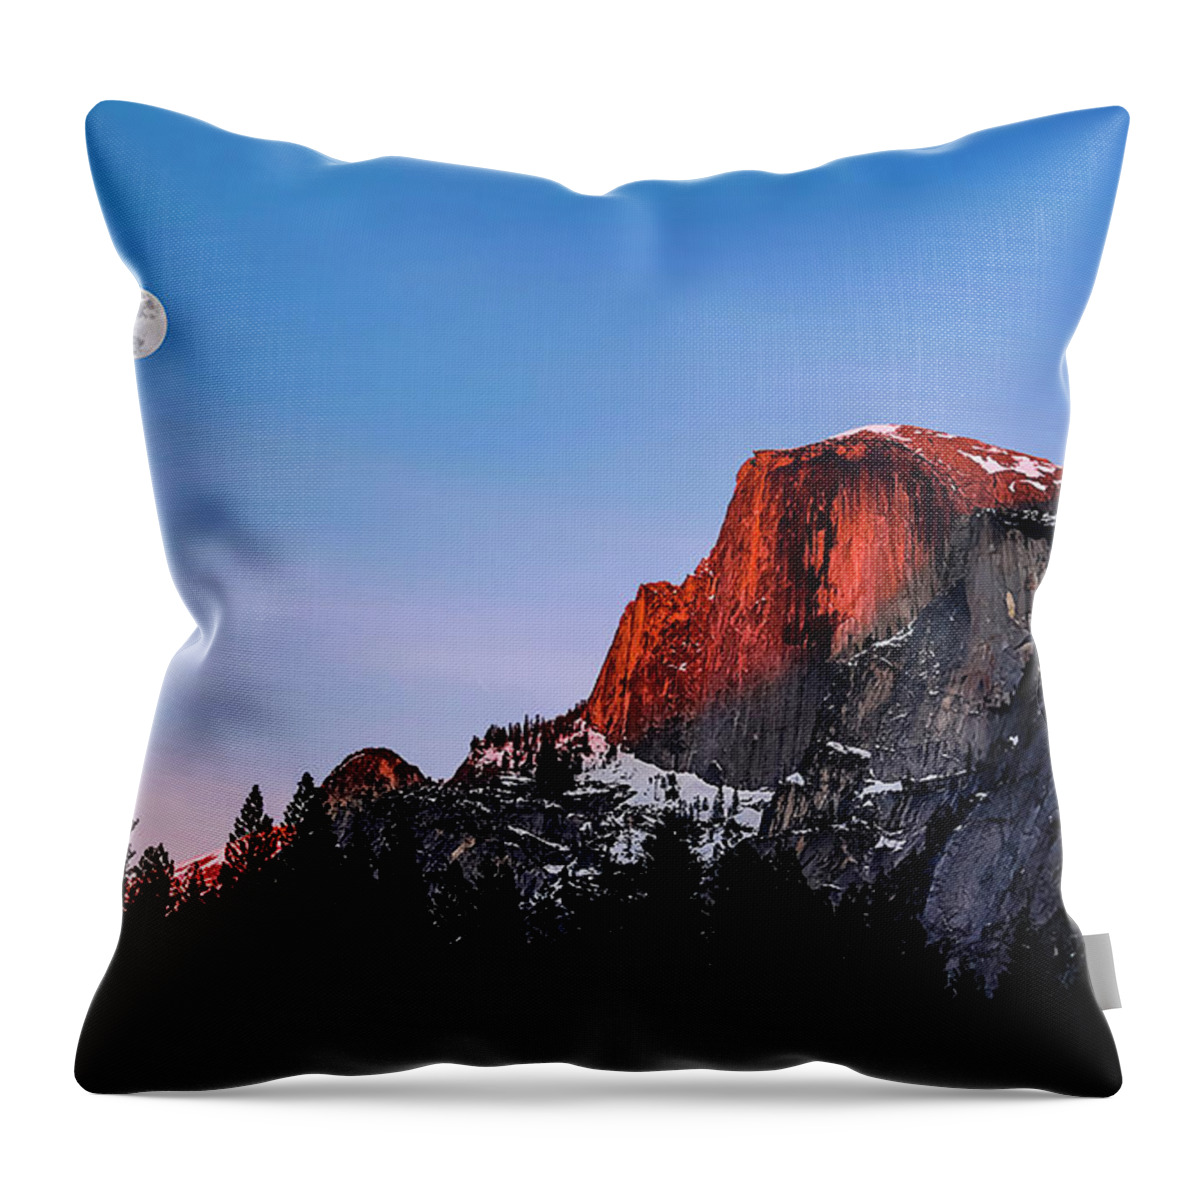  Throw Pillow featuring the photograph Half Dome by Gary Johnson